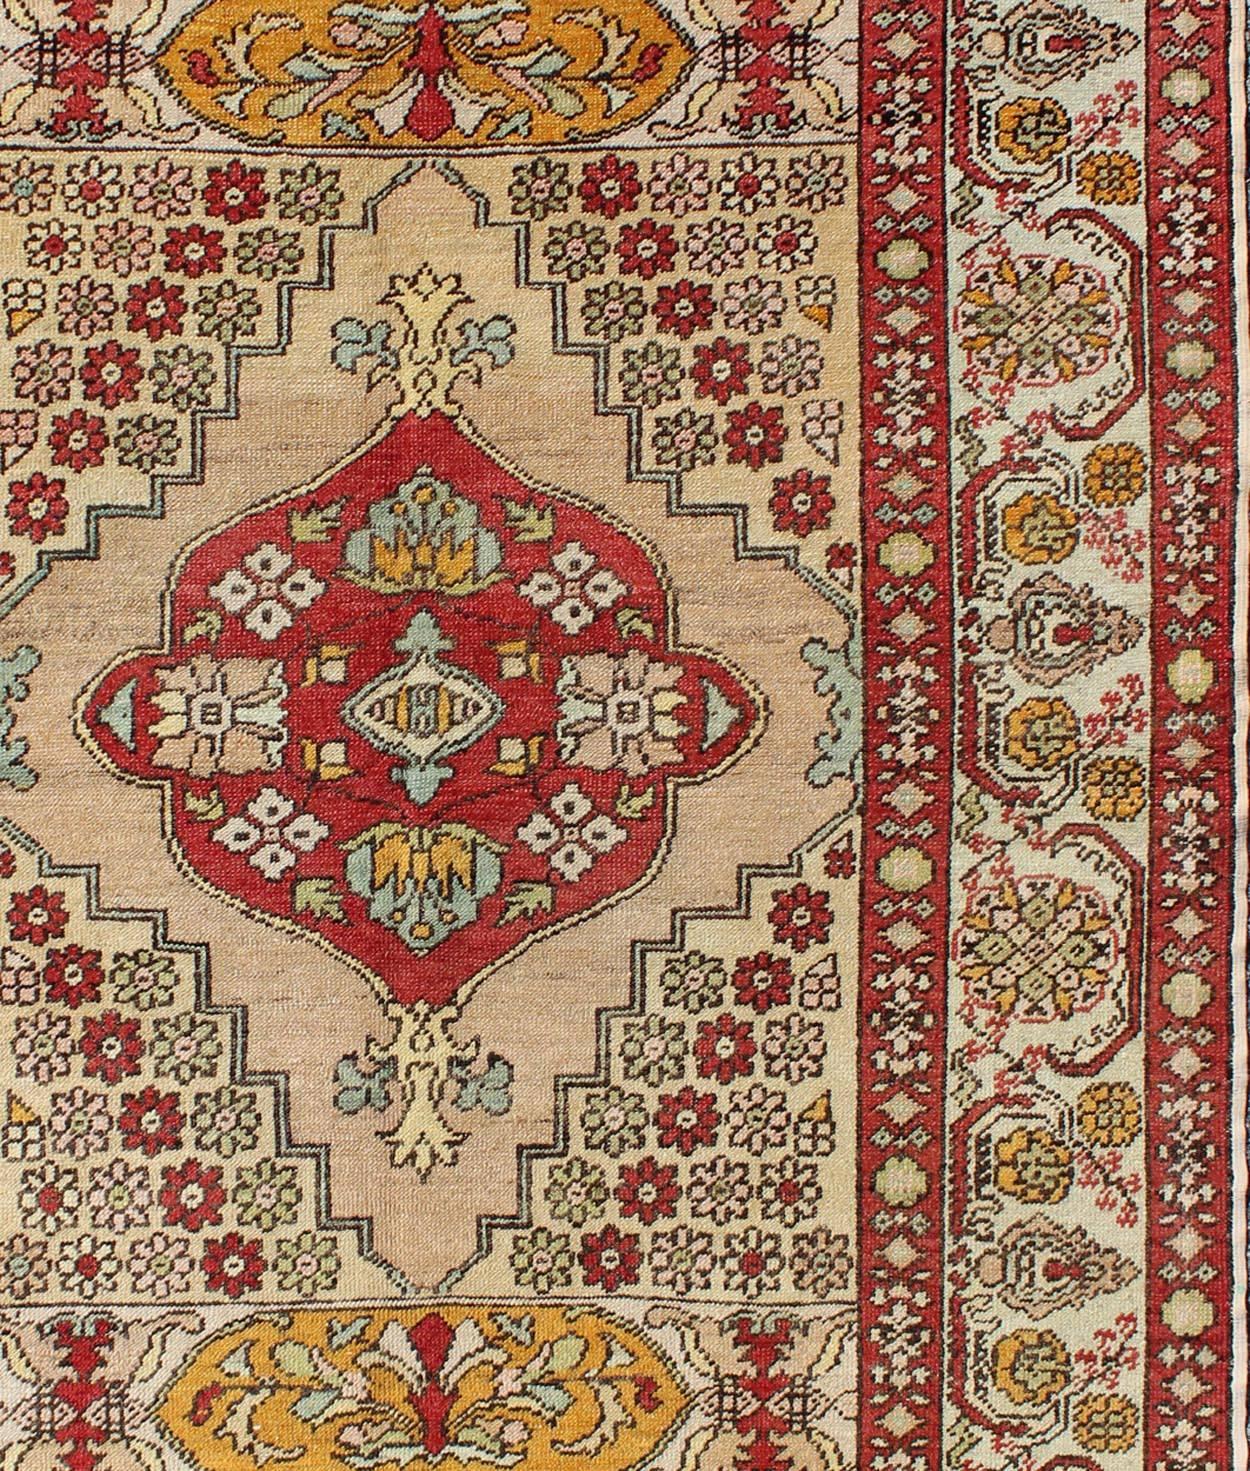 Sub-Geometric Antique Turkish Oushak Rug in Red, Gold , Green and Cream In Excellent Condition For Sale In Atlanta, GA